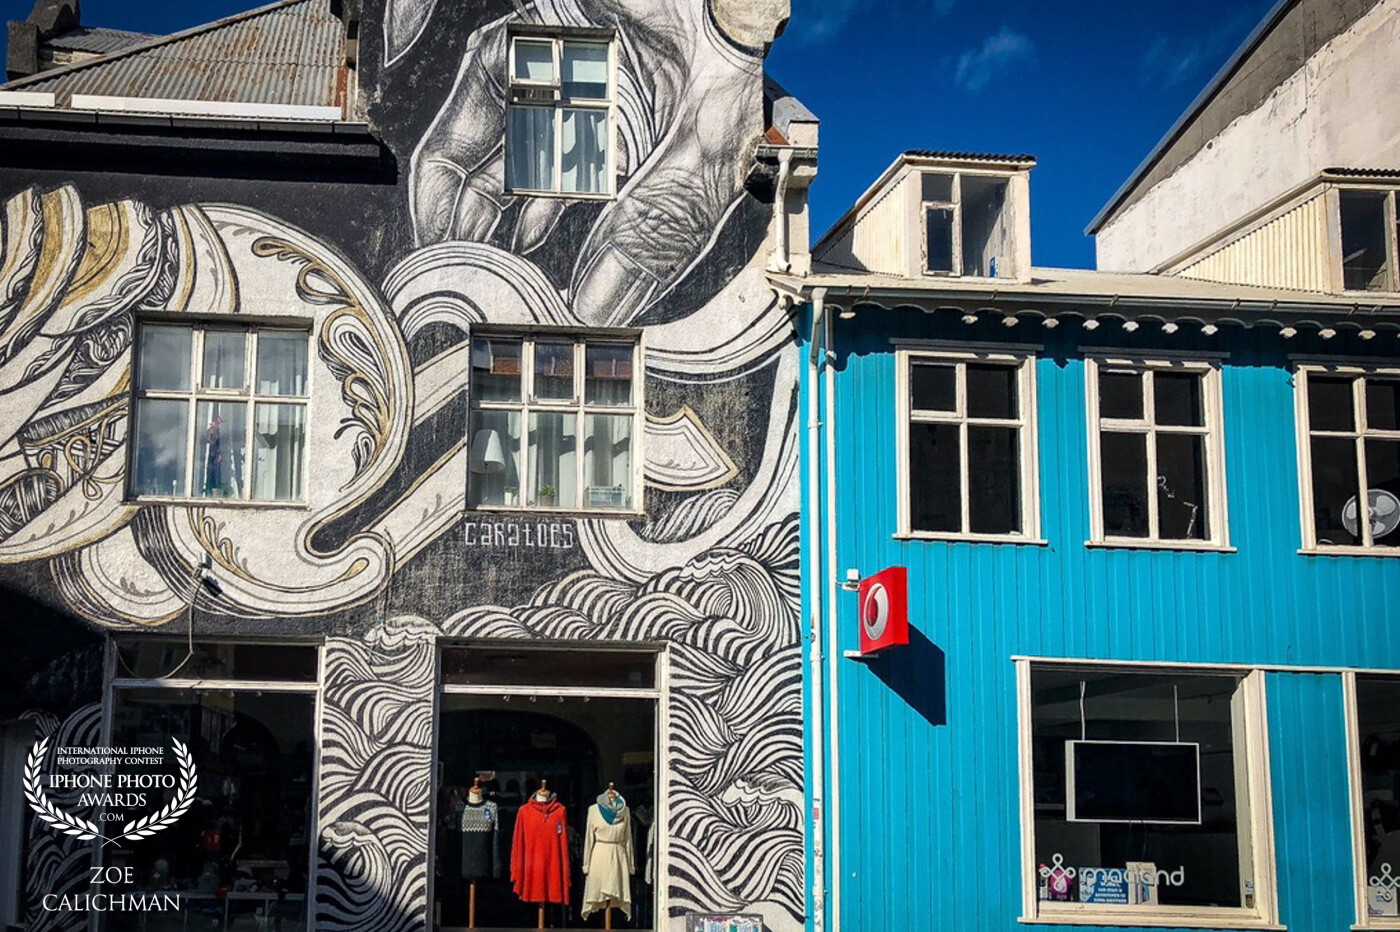 Colorful house paints and drawings all over Reykjavik in Iceland were the most pleasant surprises in its city vibe. These brillant colors and amazing graphics adorn the city with unforgettable lively scenes.